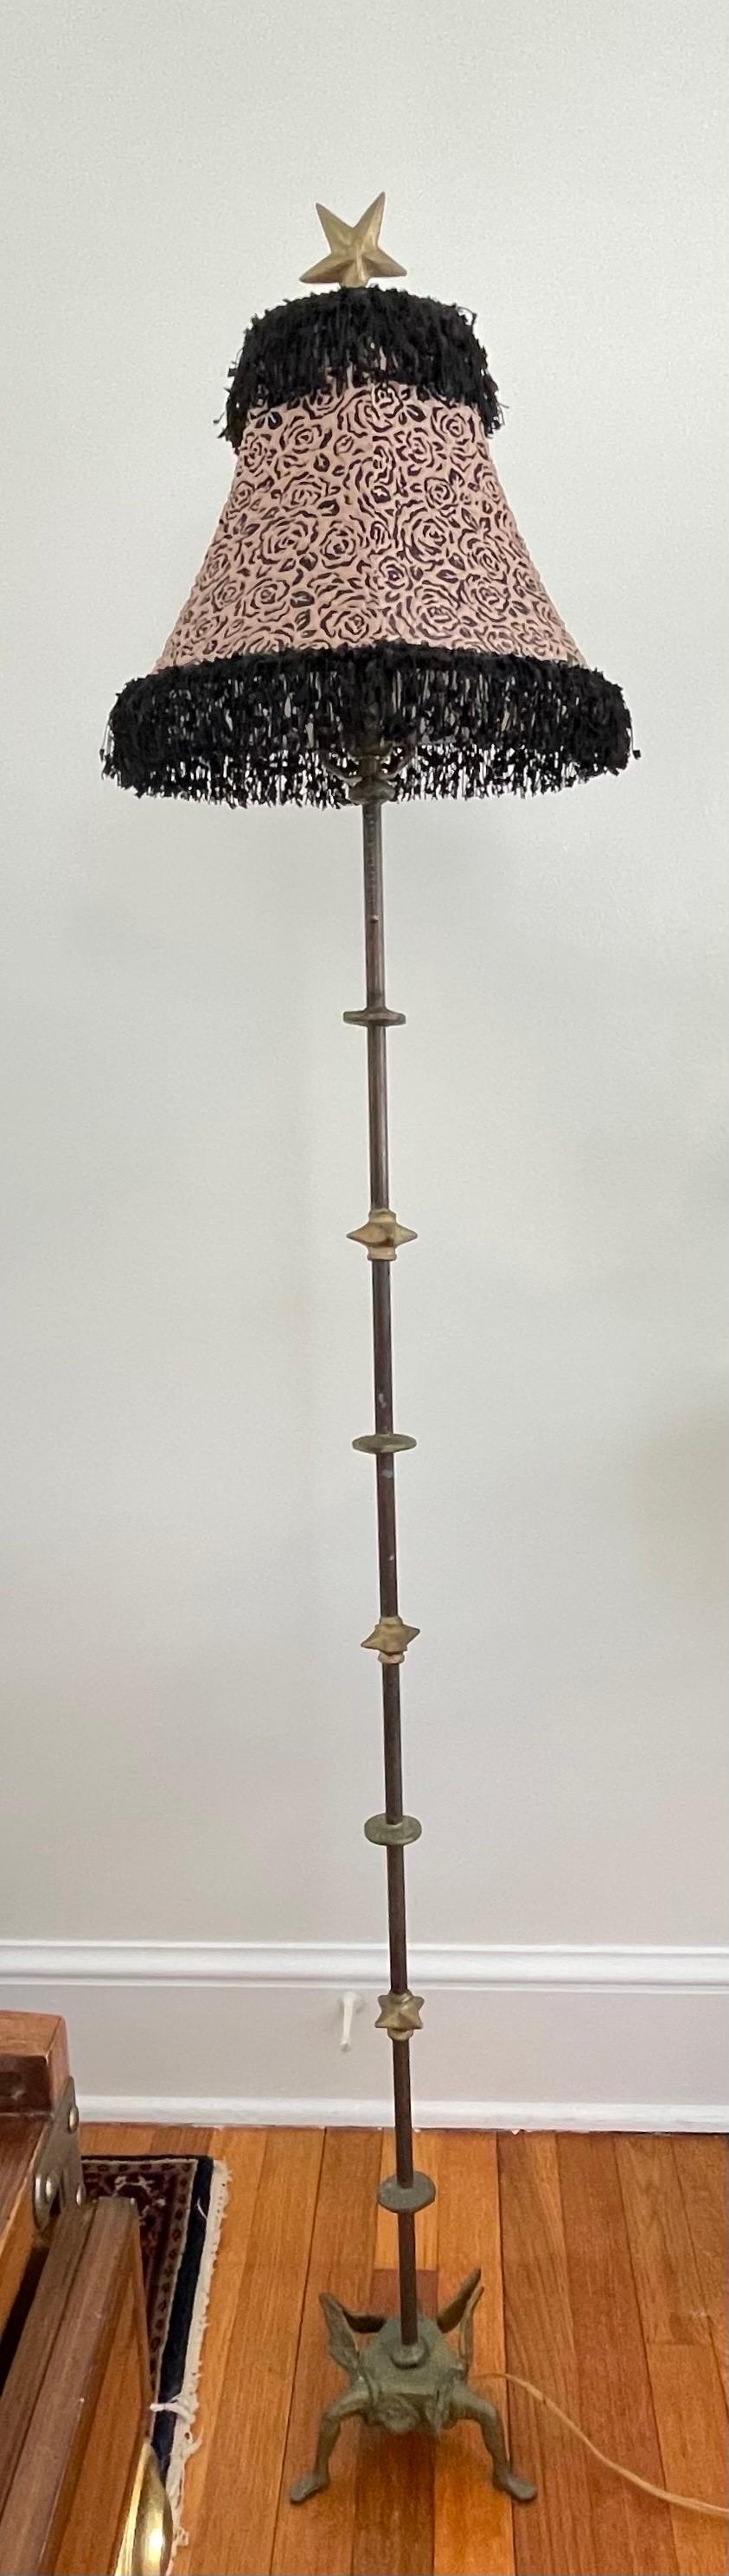 Metal floor lamp with bronze stars and moon or Etoile and lune motif. Slender lamp with alternating design jutting outward. Unique tripod base comprised of bronze winged legs. Giacometti styling.
Curbside to NYC/Philly $300